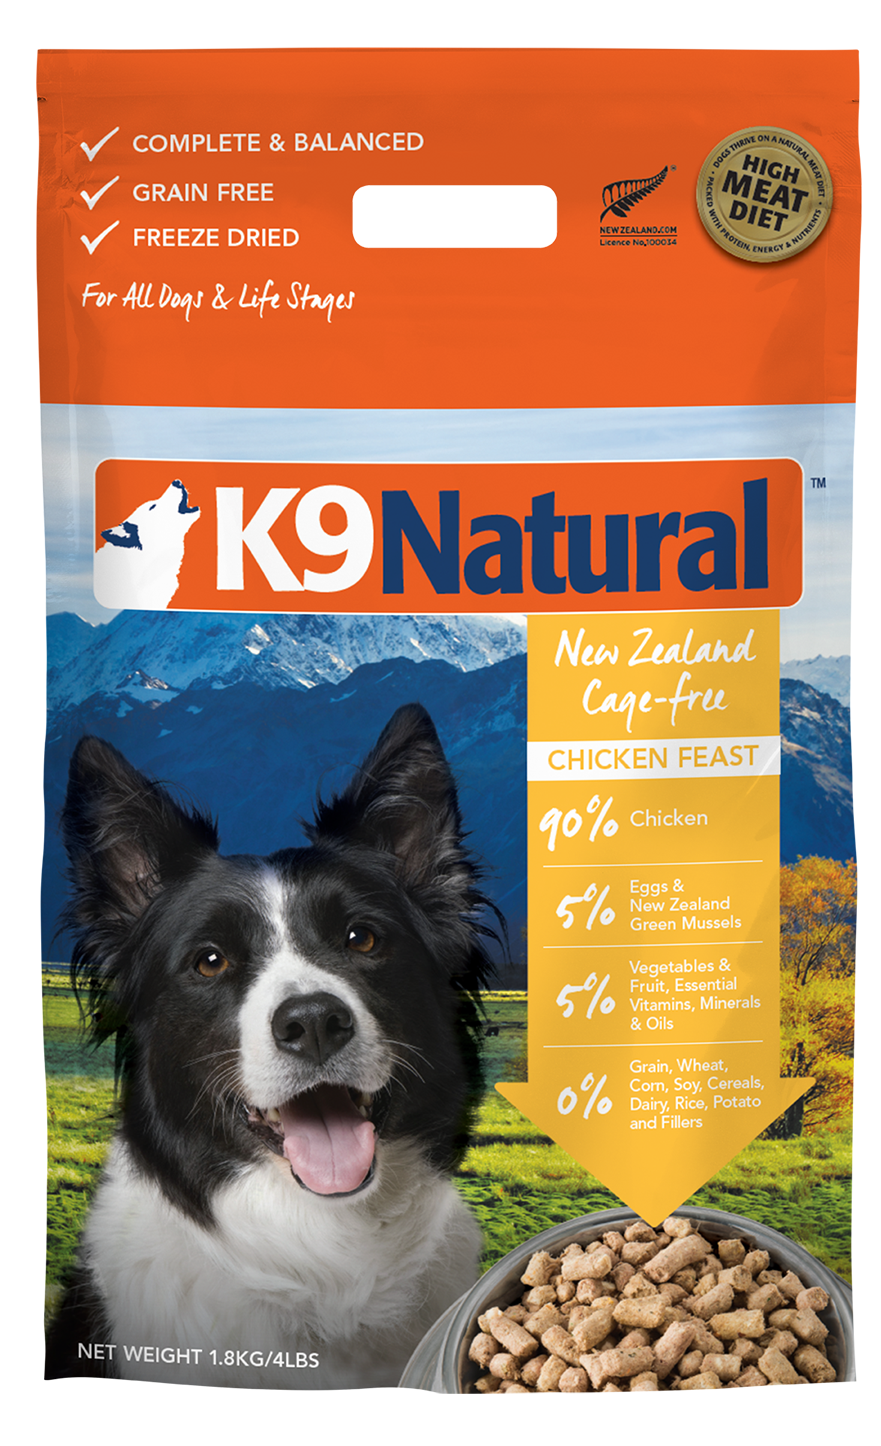 K9 Natural Dog Freeze Dried Food Chicken Feast On Sale At NJ